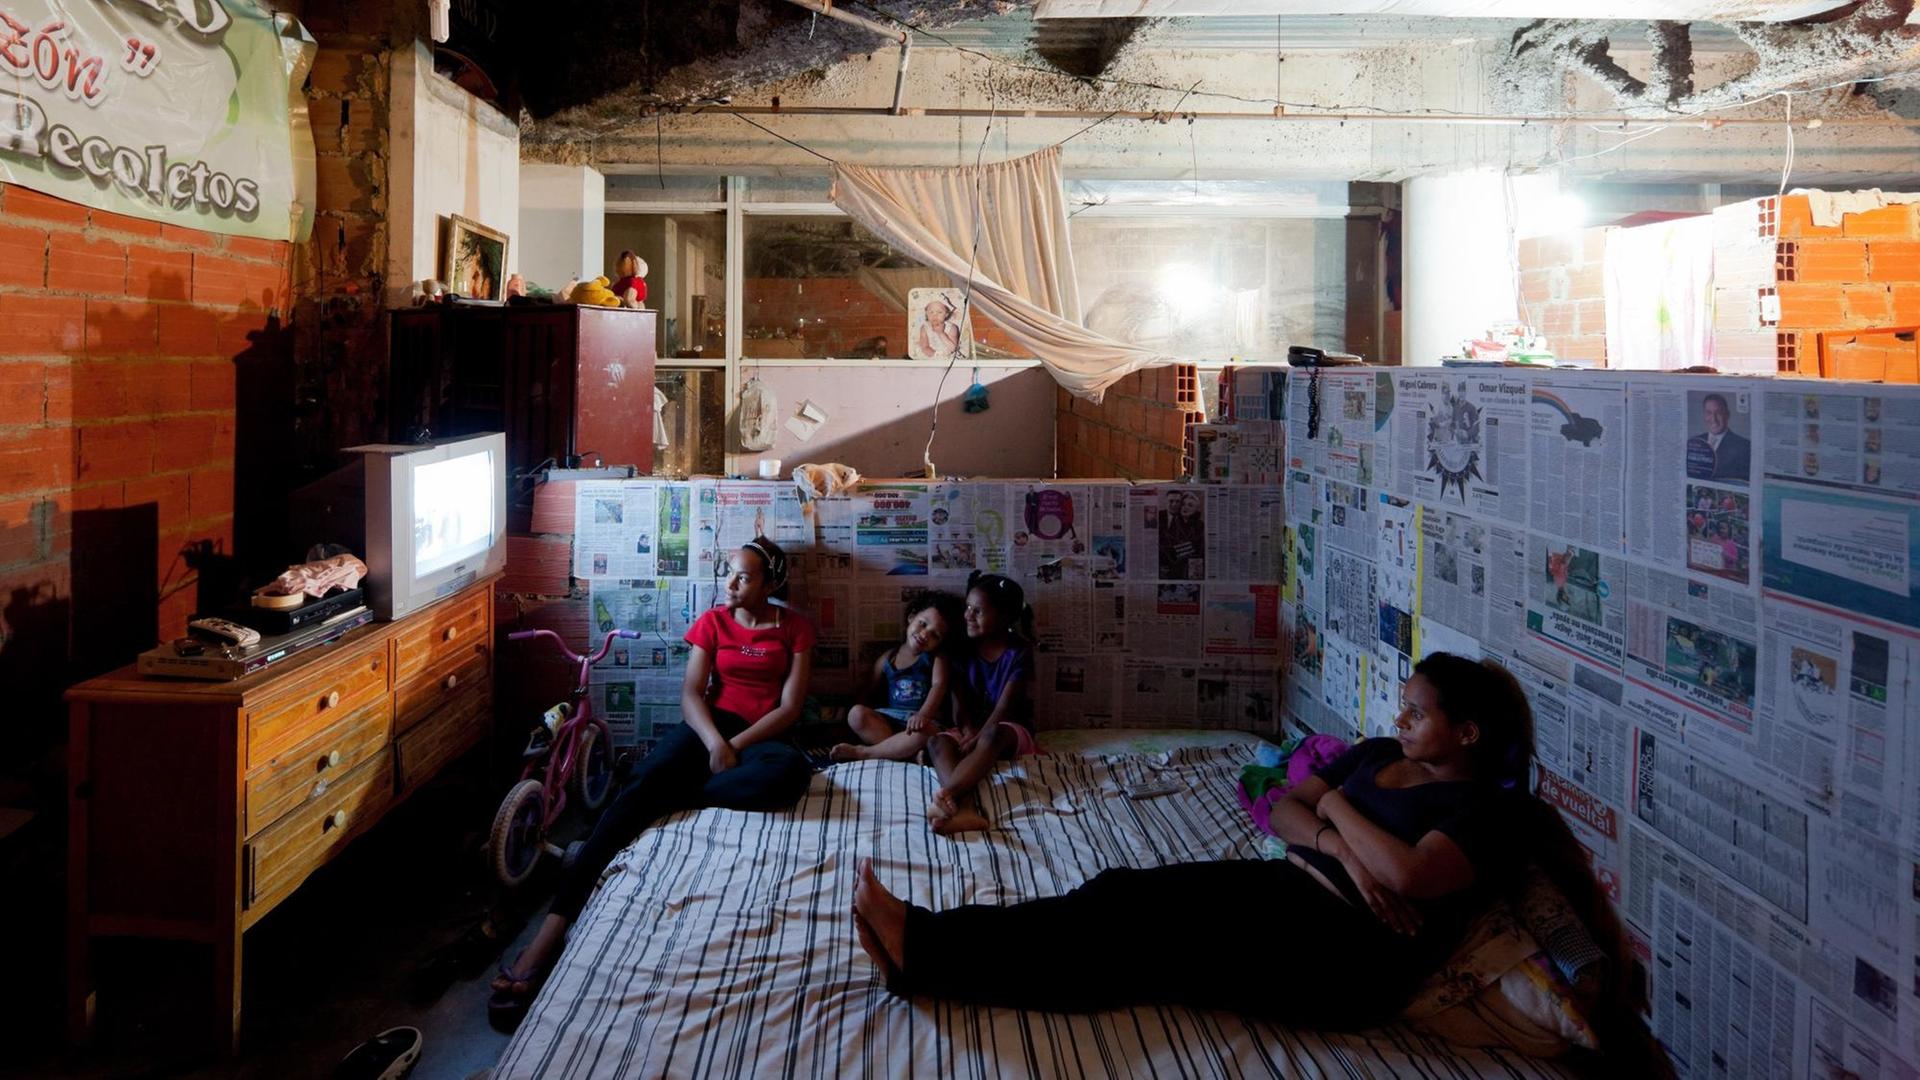 Four people sit on mattresses on the floor in a shell and watch television